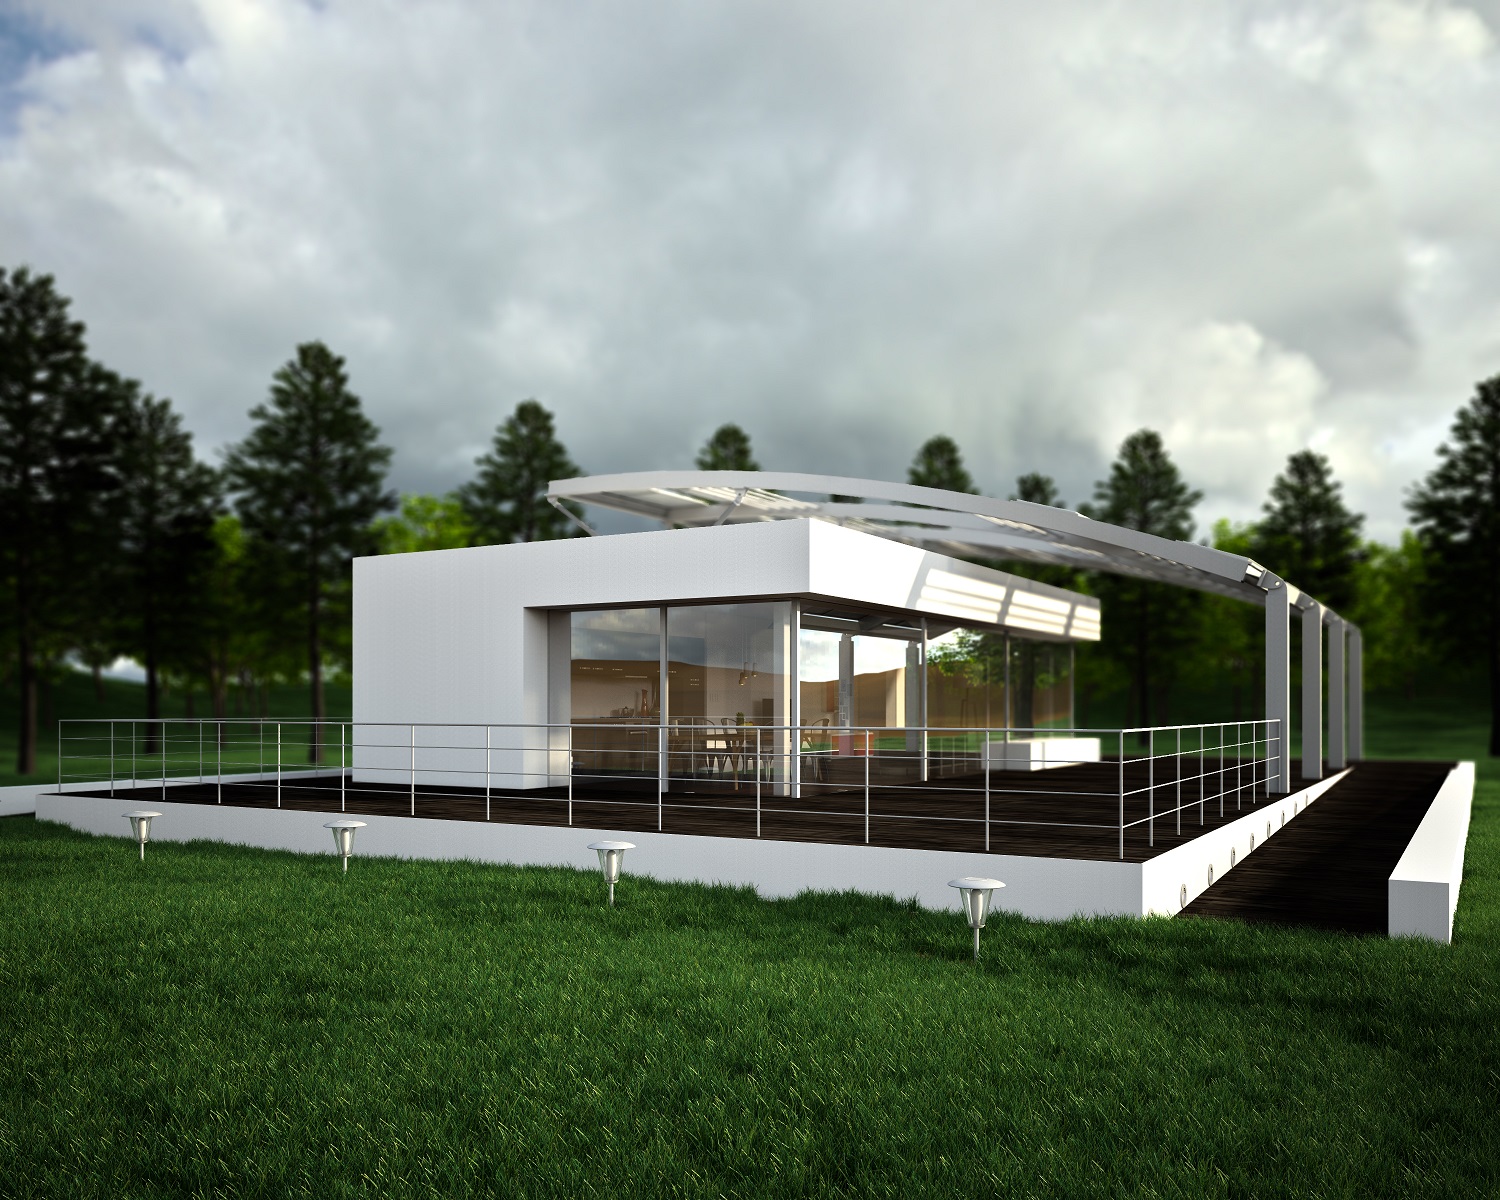 Computer-generated image of a modern-looking house.